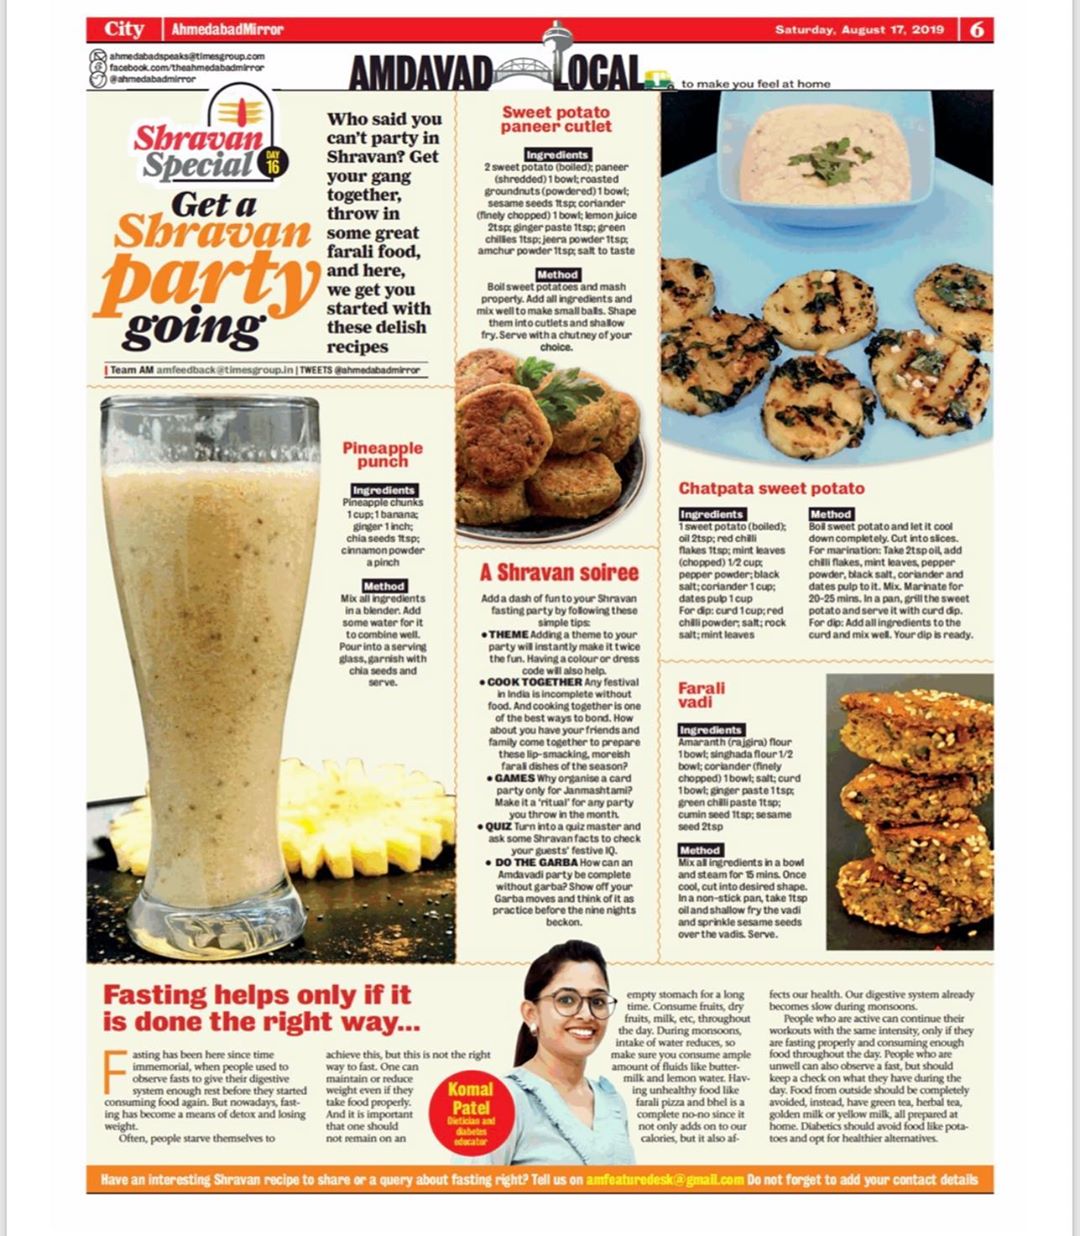 #shravan 
Shravan special featured in #ahmedabadmirror #times 
Fasting - An boon if done it in a right way....
#komalpatel #diet #dietitian #recipes #fastrecipes #fasting